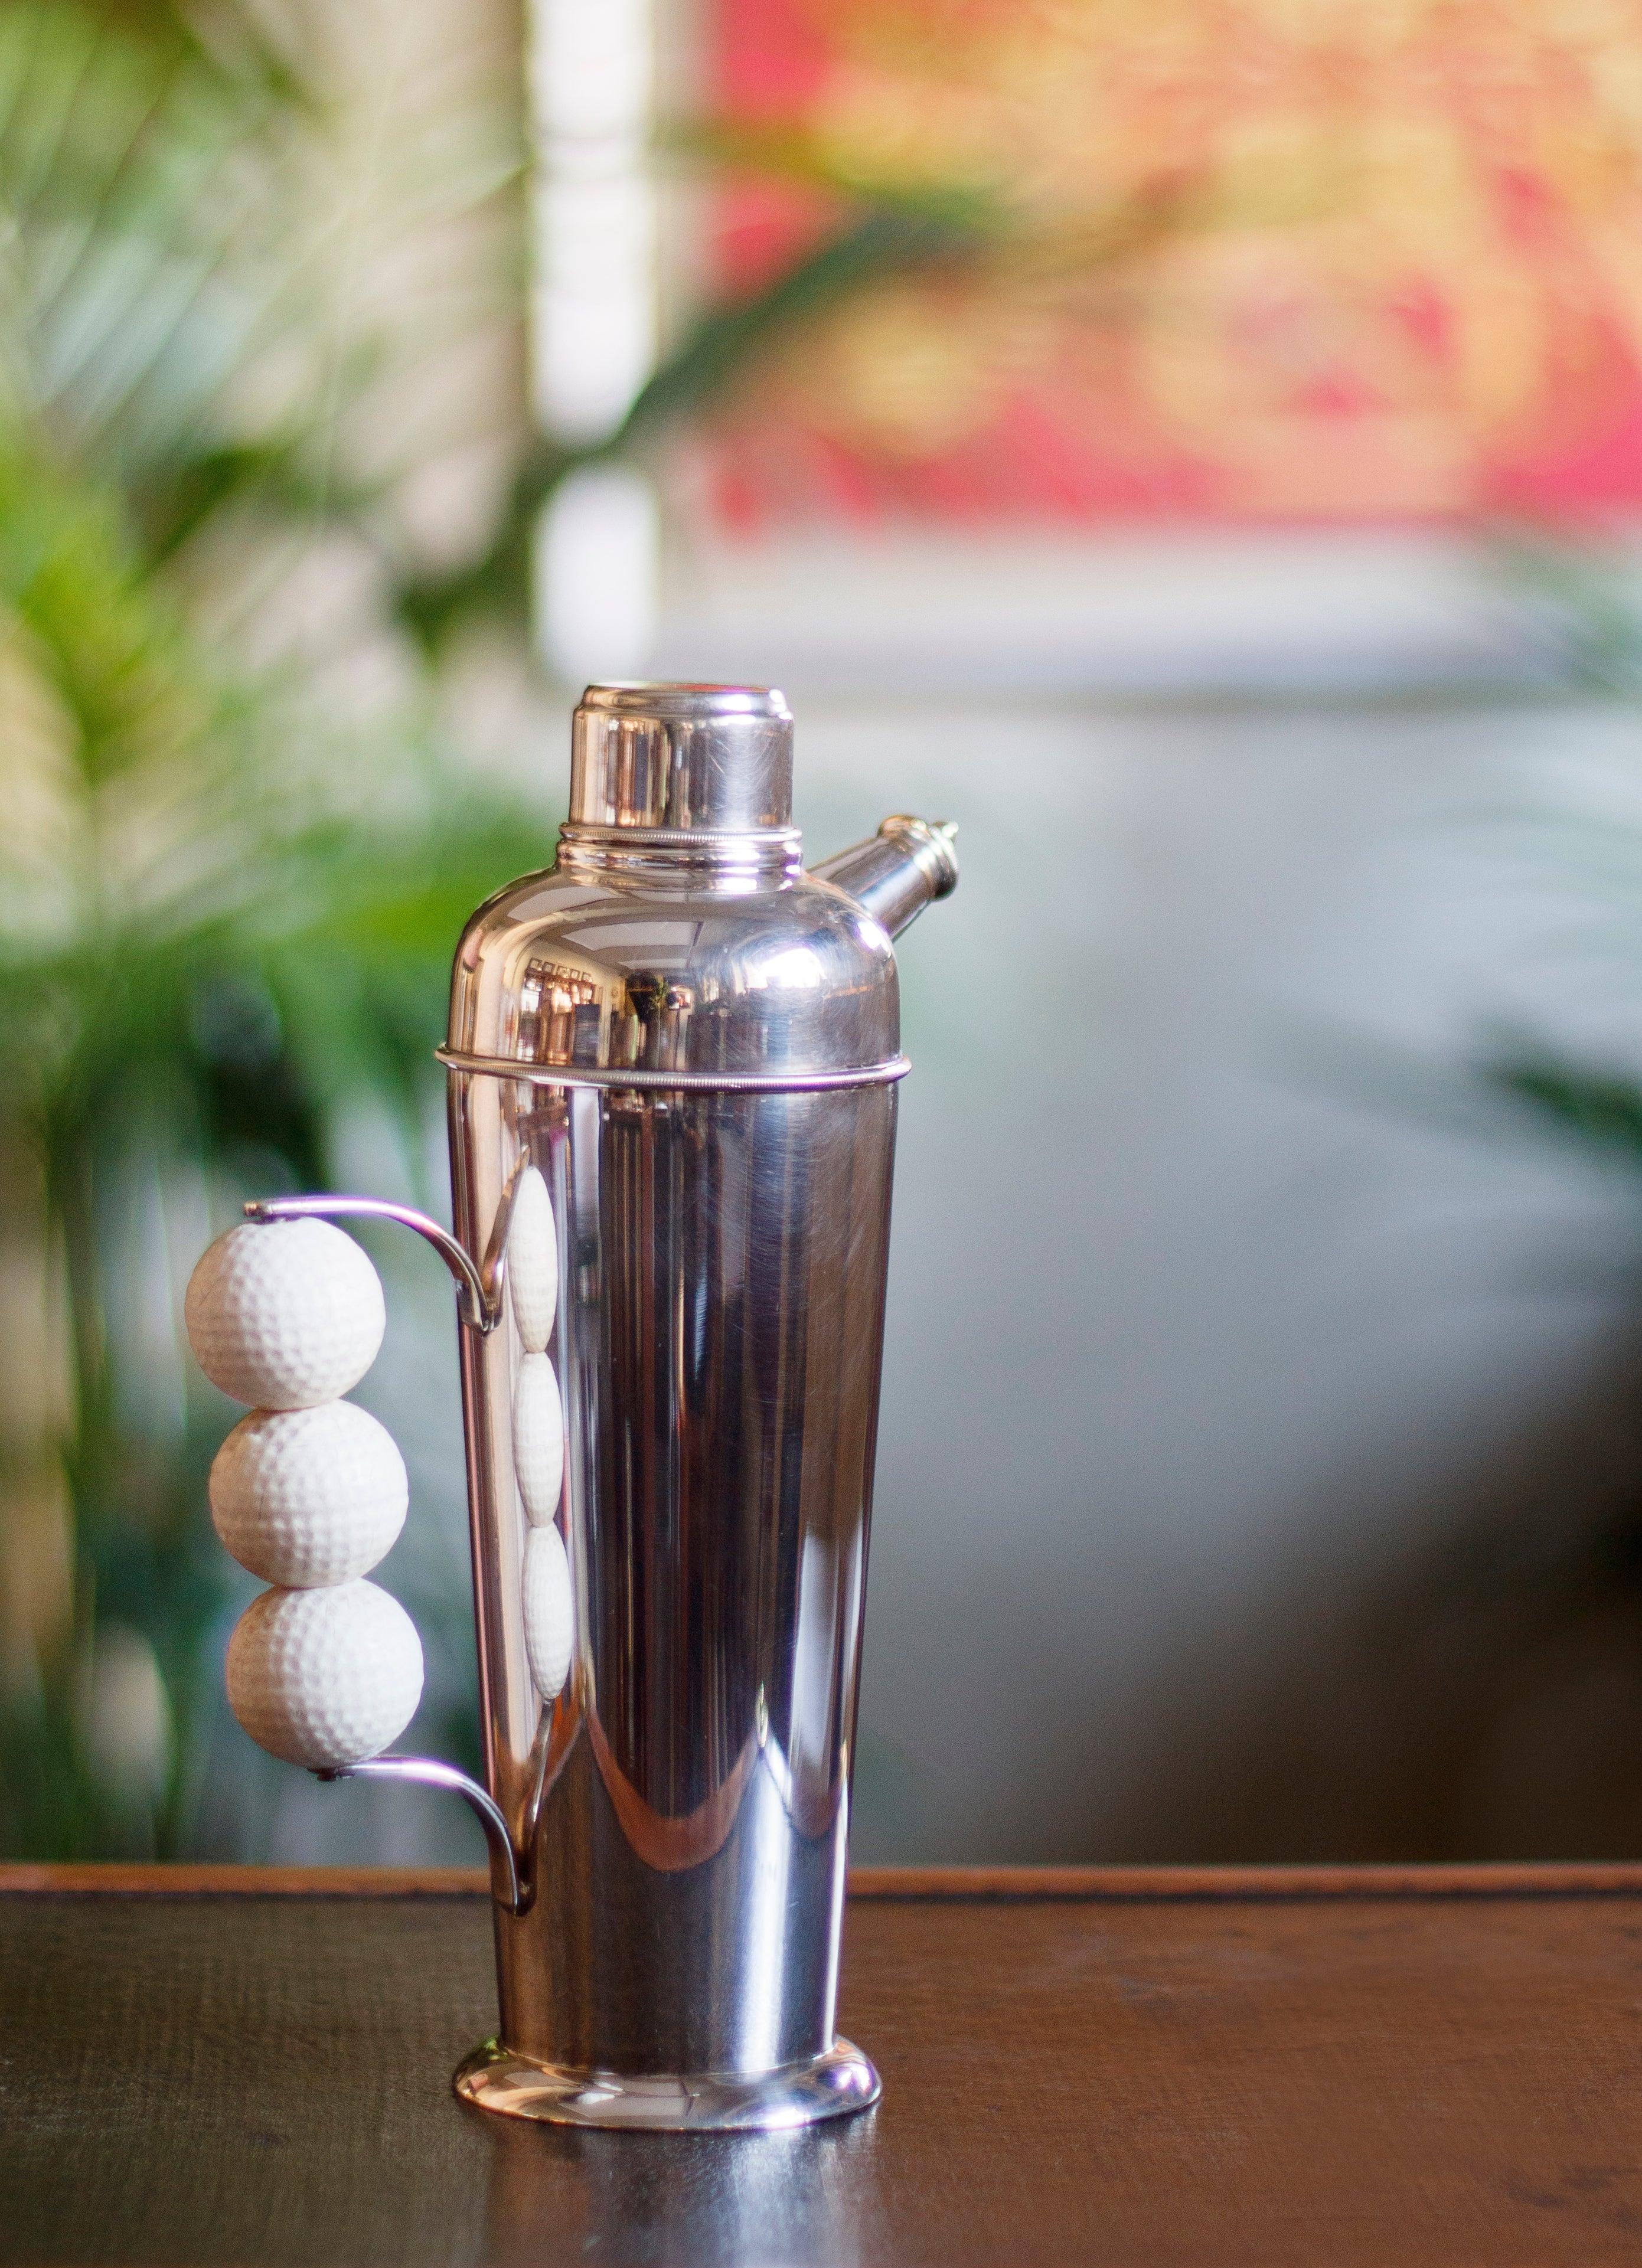 Unique and fine silver plated shaker with a particular Golf balls handle. The reason behind this interesting design lies in the fact that during Prohibitionism the serving of alcohol and any articles related to it were forbidden. Due to this, the